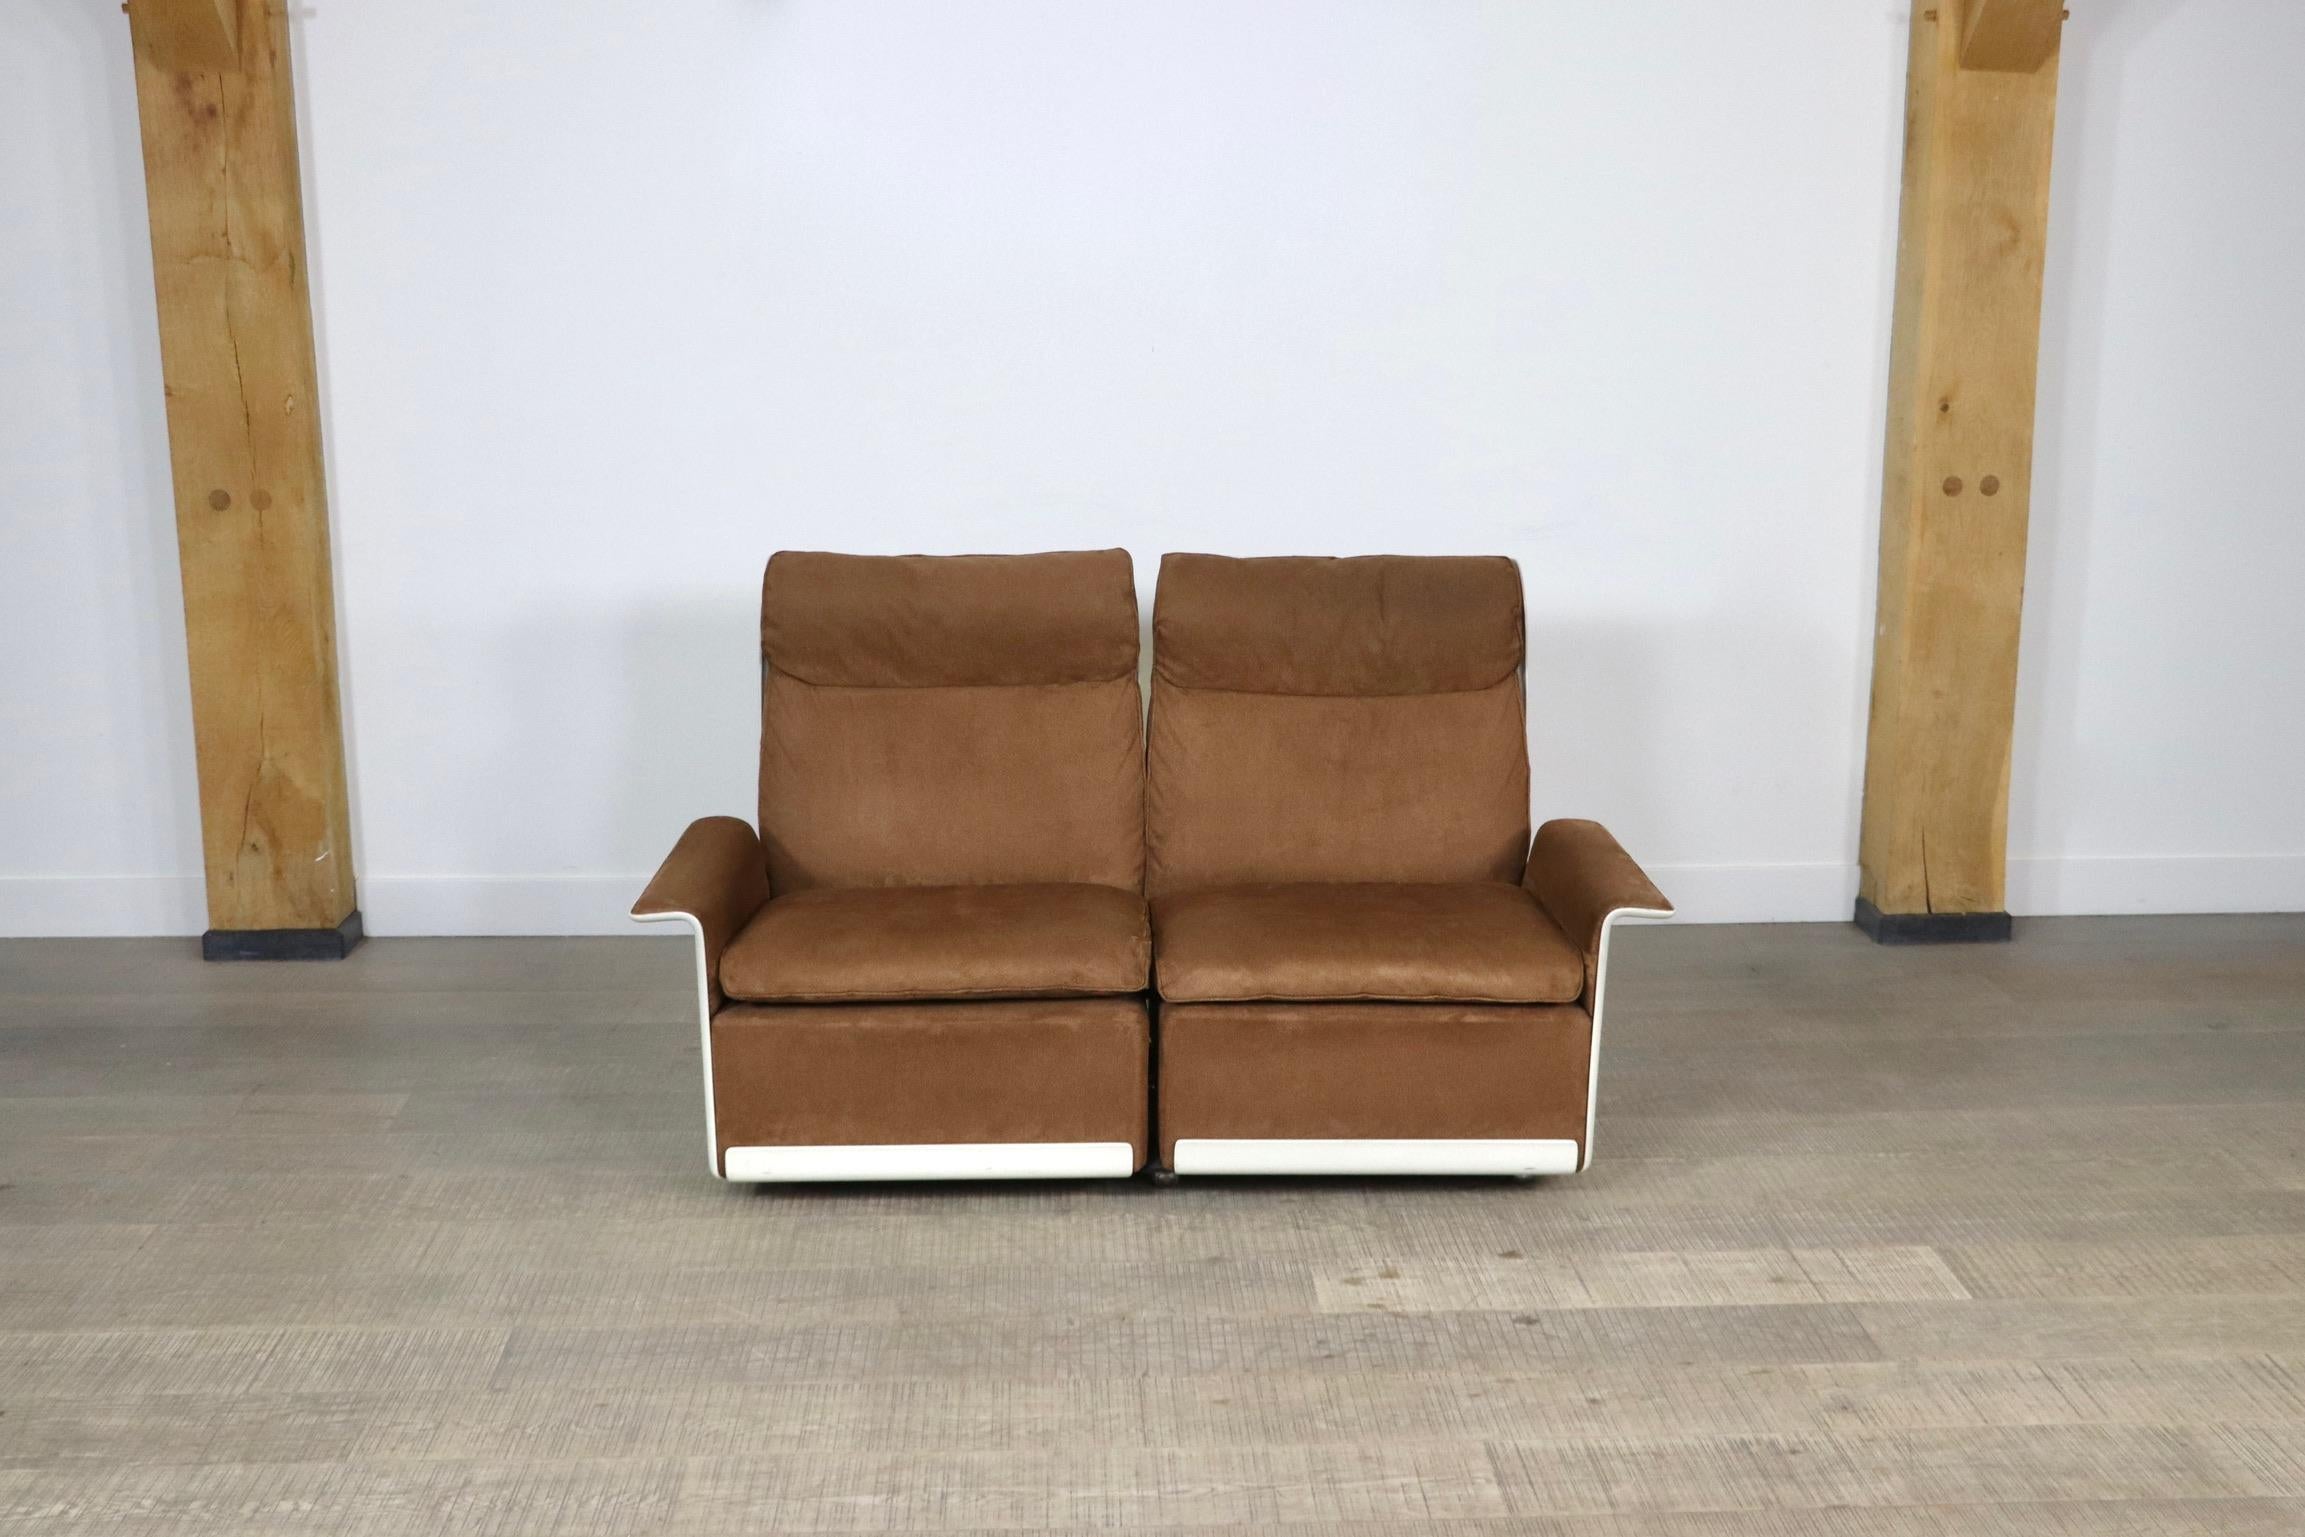 Amazing model 620 two seater sofa in cognac alcantara upholstery and white frame, designed by Dieter Rams in 1962 for German manufacturer Vitsœ. The shells are made of A hot-pressed sheet moulding compound that sits on six chromed wheels. This